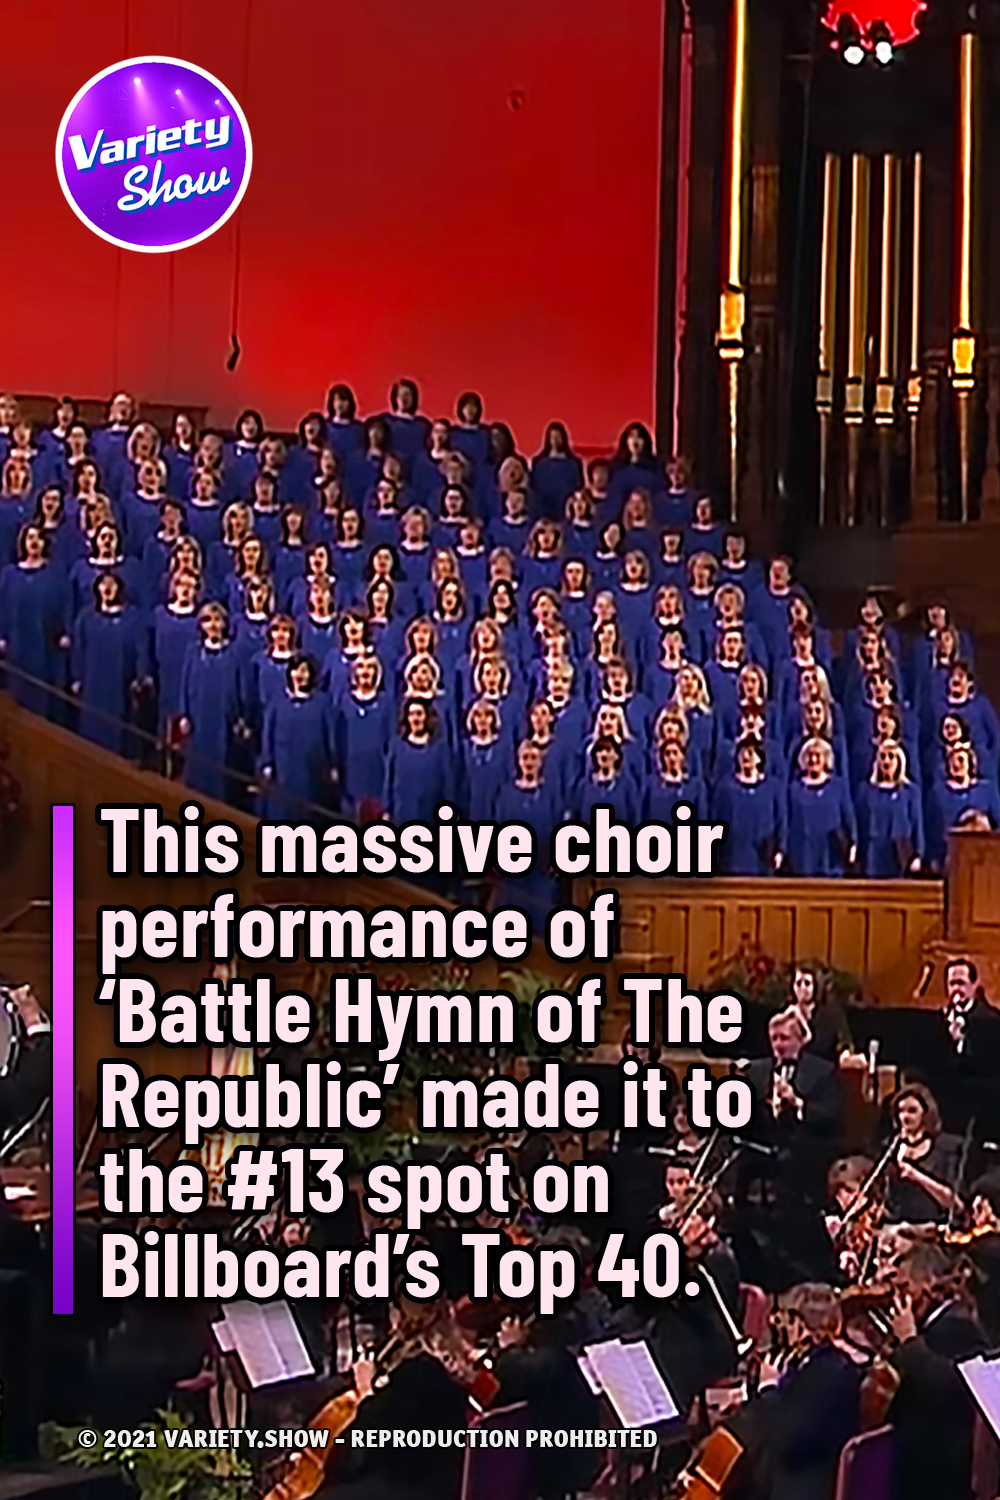 This massive choir performance of ‘Battle Hymn of The Republic’ made it to the #13 spot on Billboard’s Top 40.